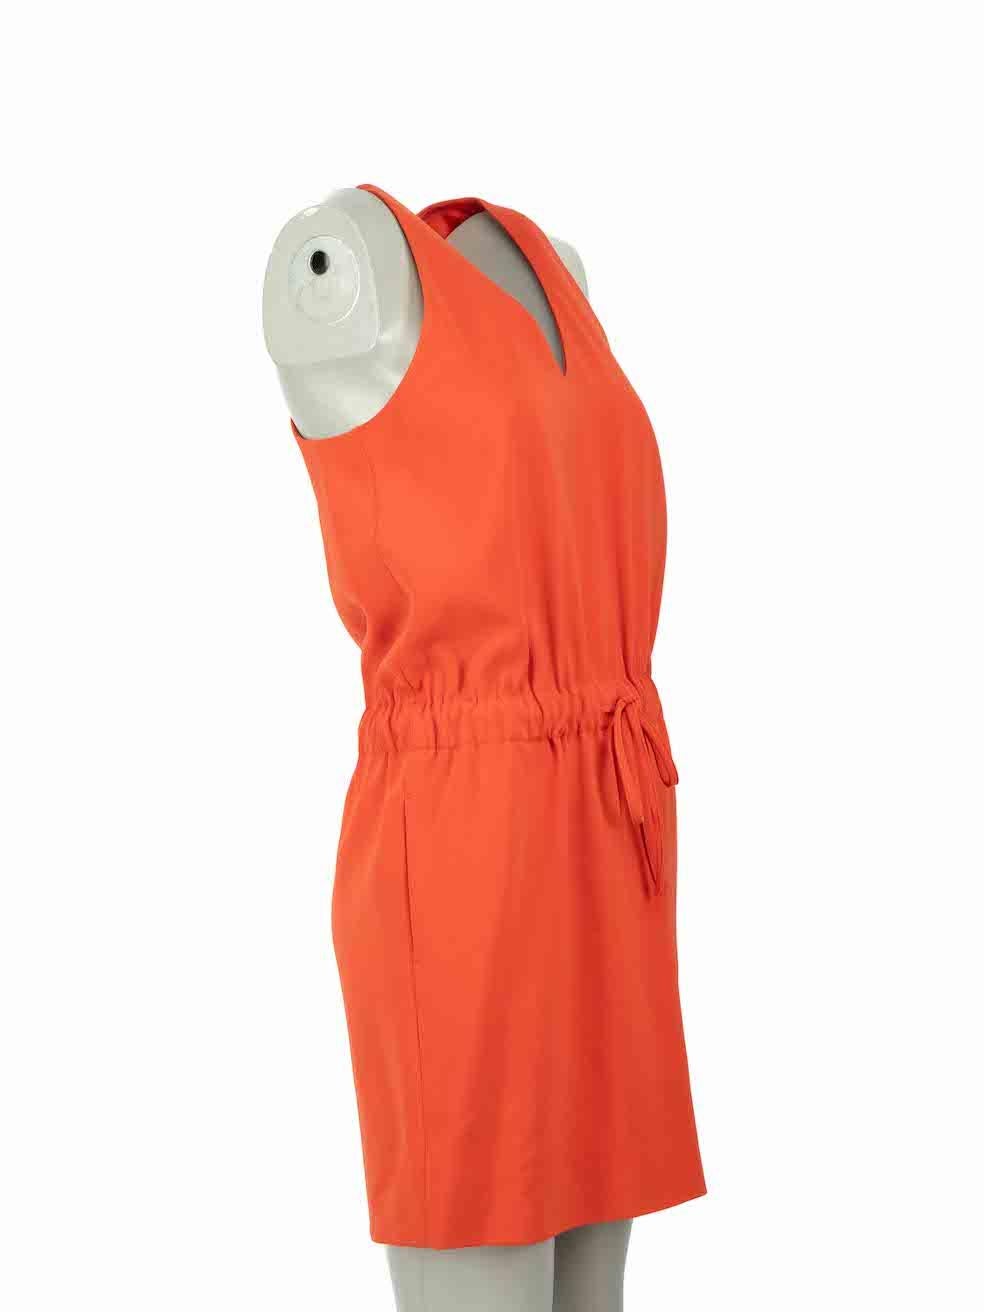 CONDITION is Very good. Minimal wear to dress is evident. Minimal wear to both sides with small plucks to the weave and the hanger ribbons at the underarms have been cut on this used Boutique Moschino¬†designer resale item.
 